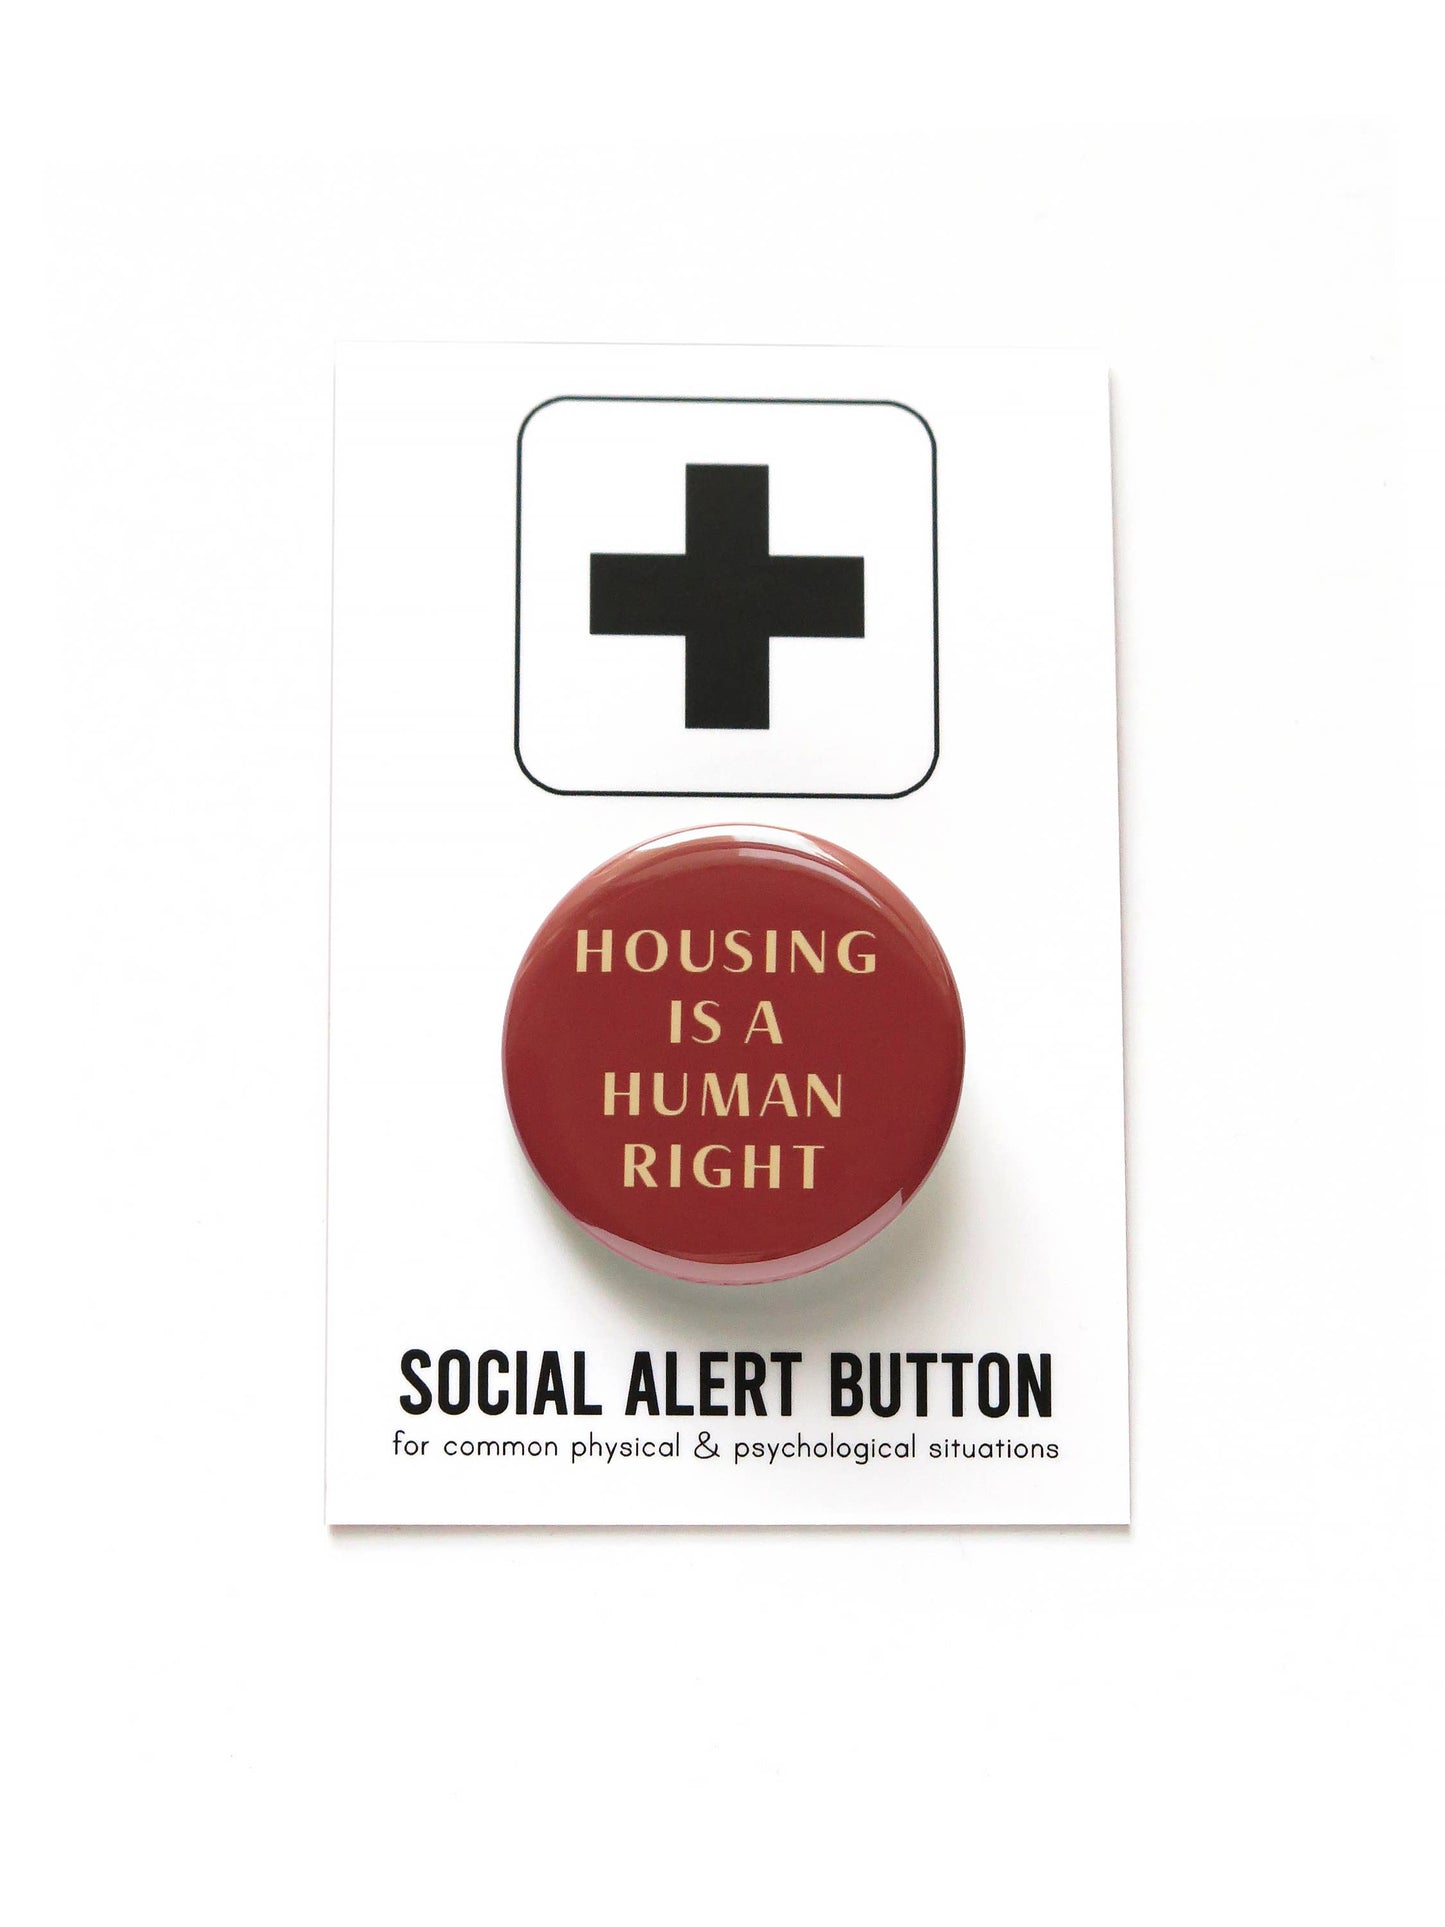 HOUSING IS A HUMAN RIGHT Social Justice pinback button